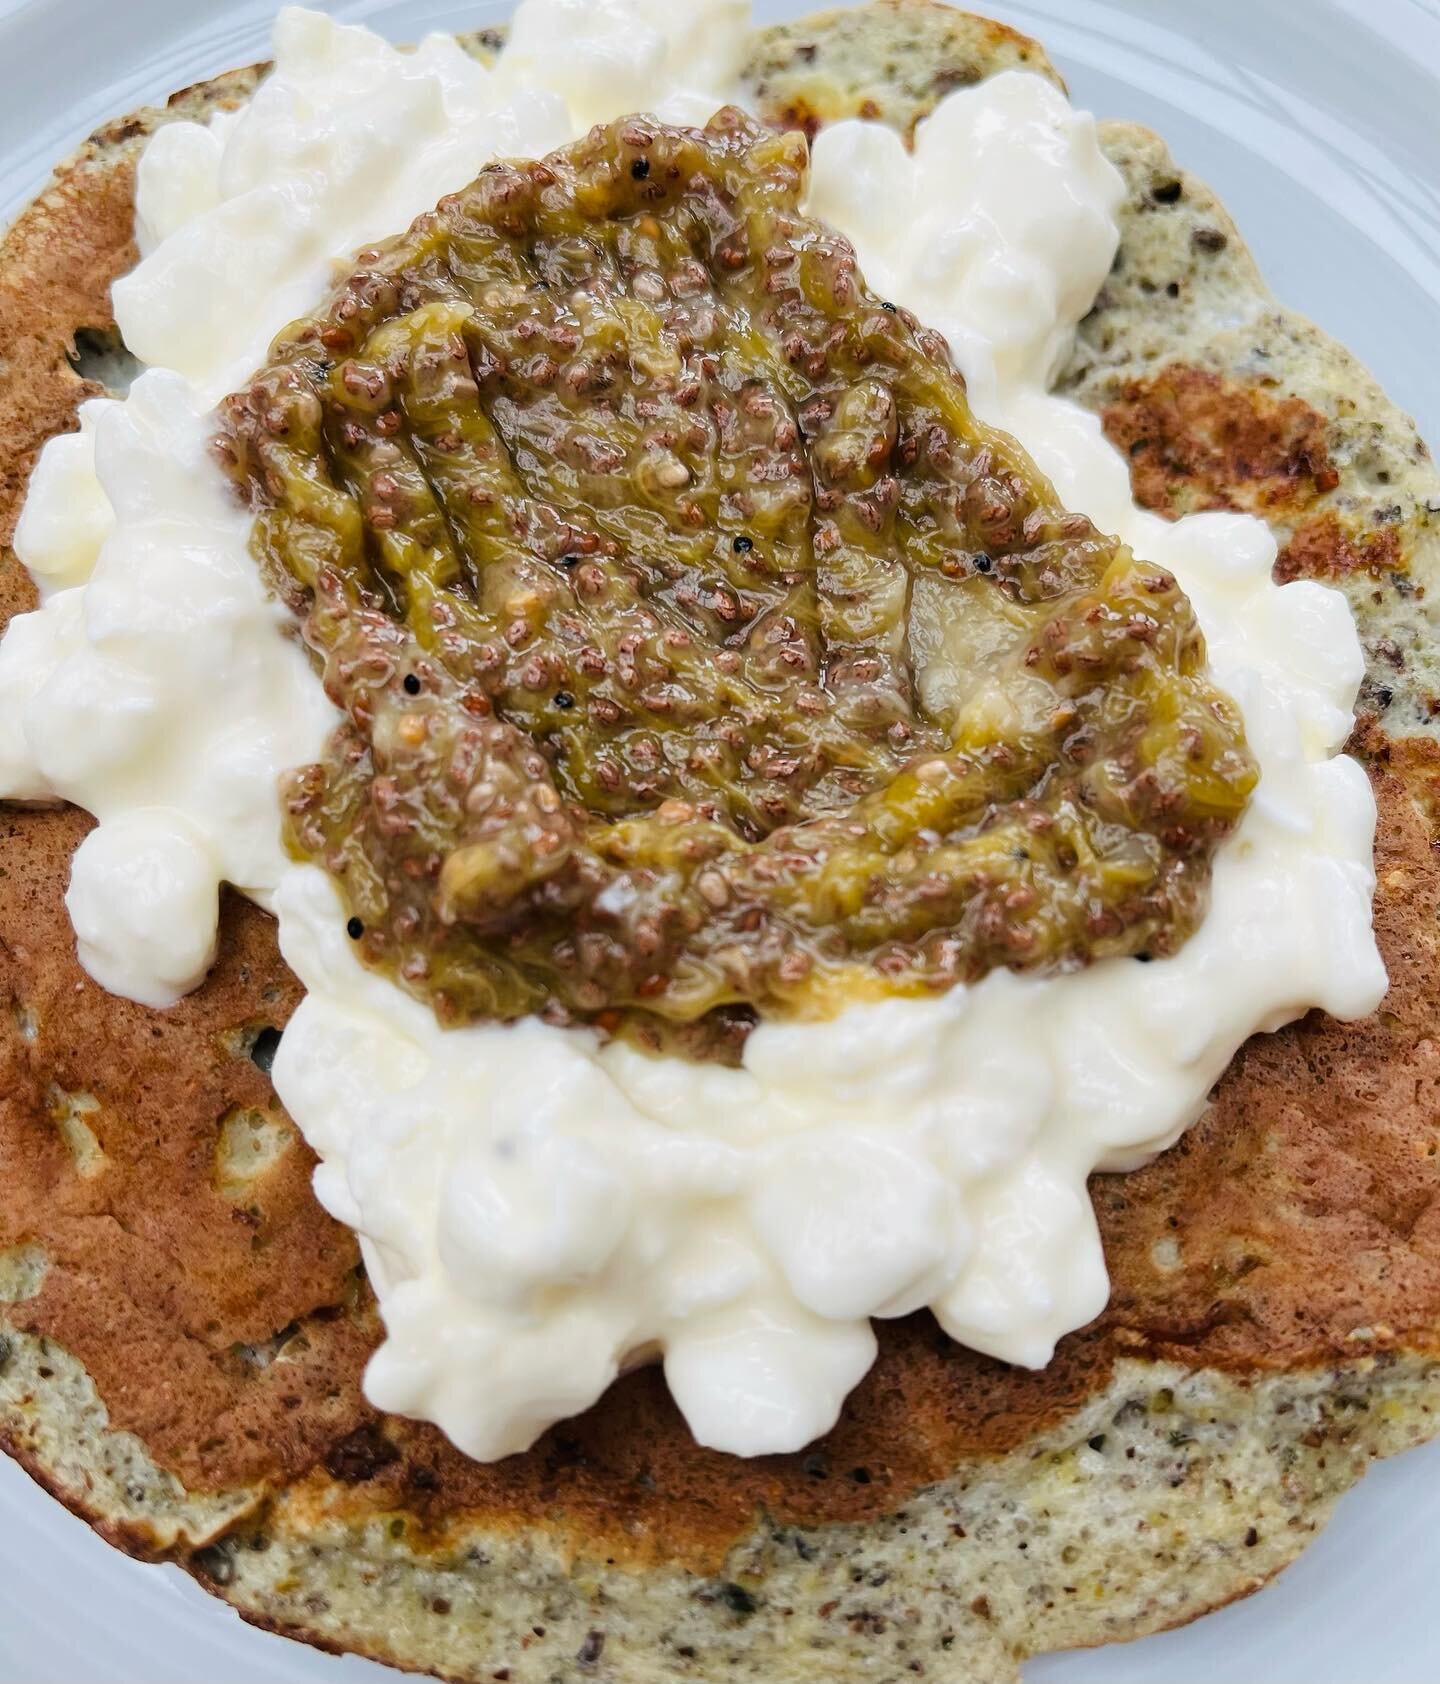 Banana Flaxseed Breakfast Pancake, with cottage cheese and rhubarb chia jam 😋
*perfect start to the day - quick, easy, protein and fibre rich, TASTY!
(ticks the boxes if you&rsquo;re not the biggest savoury breakfast fan, like me!)
*half a banana 
*